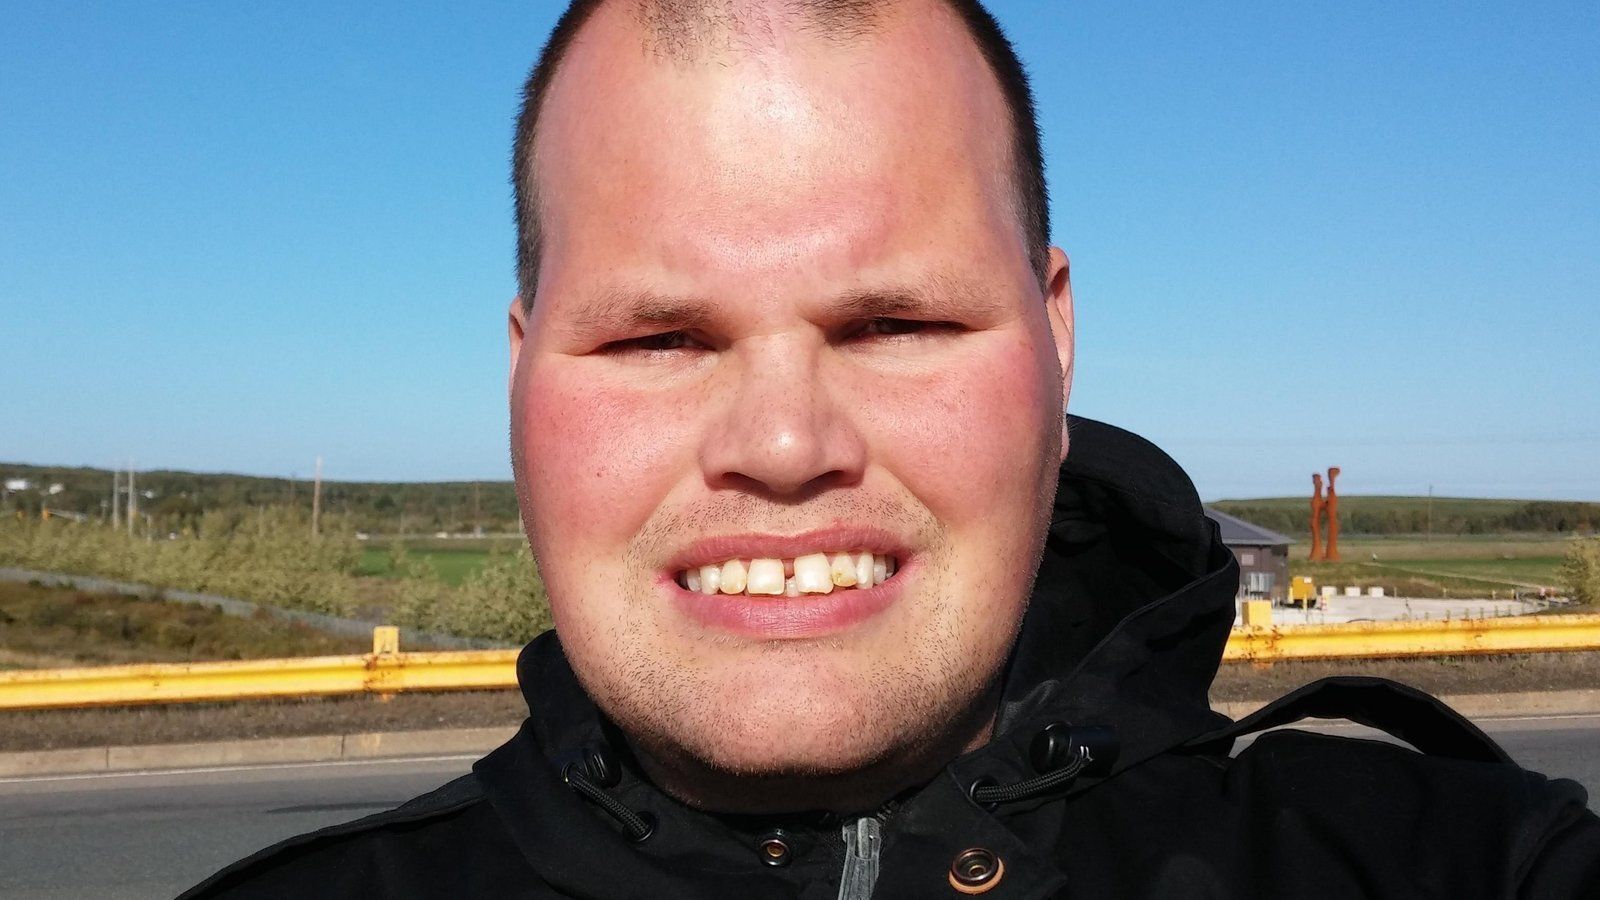 Frankie MacDonald Causes Bitcoin Price To Rise After Shouting "BITCOIN!"